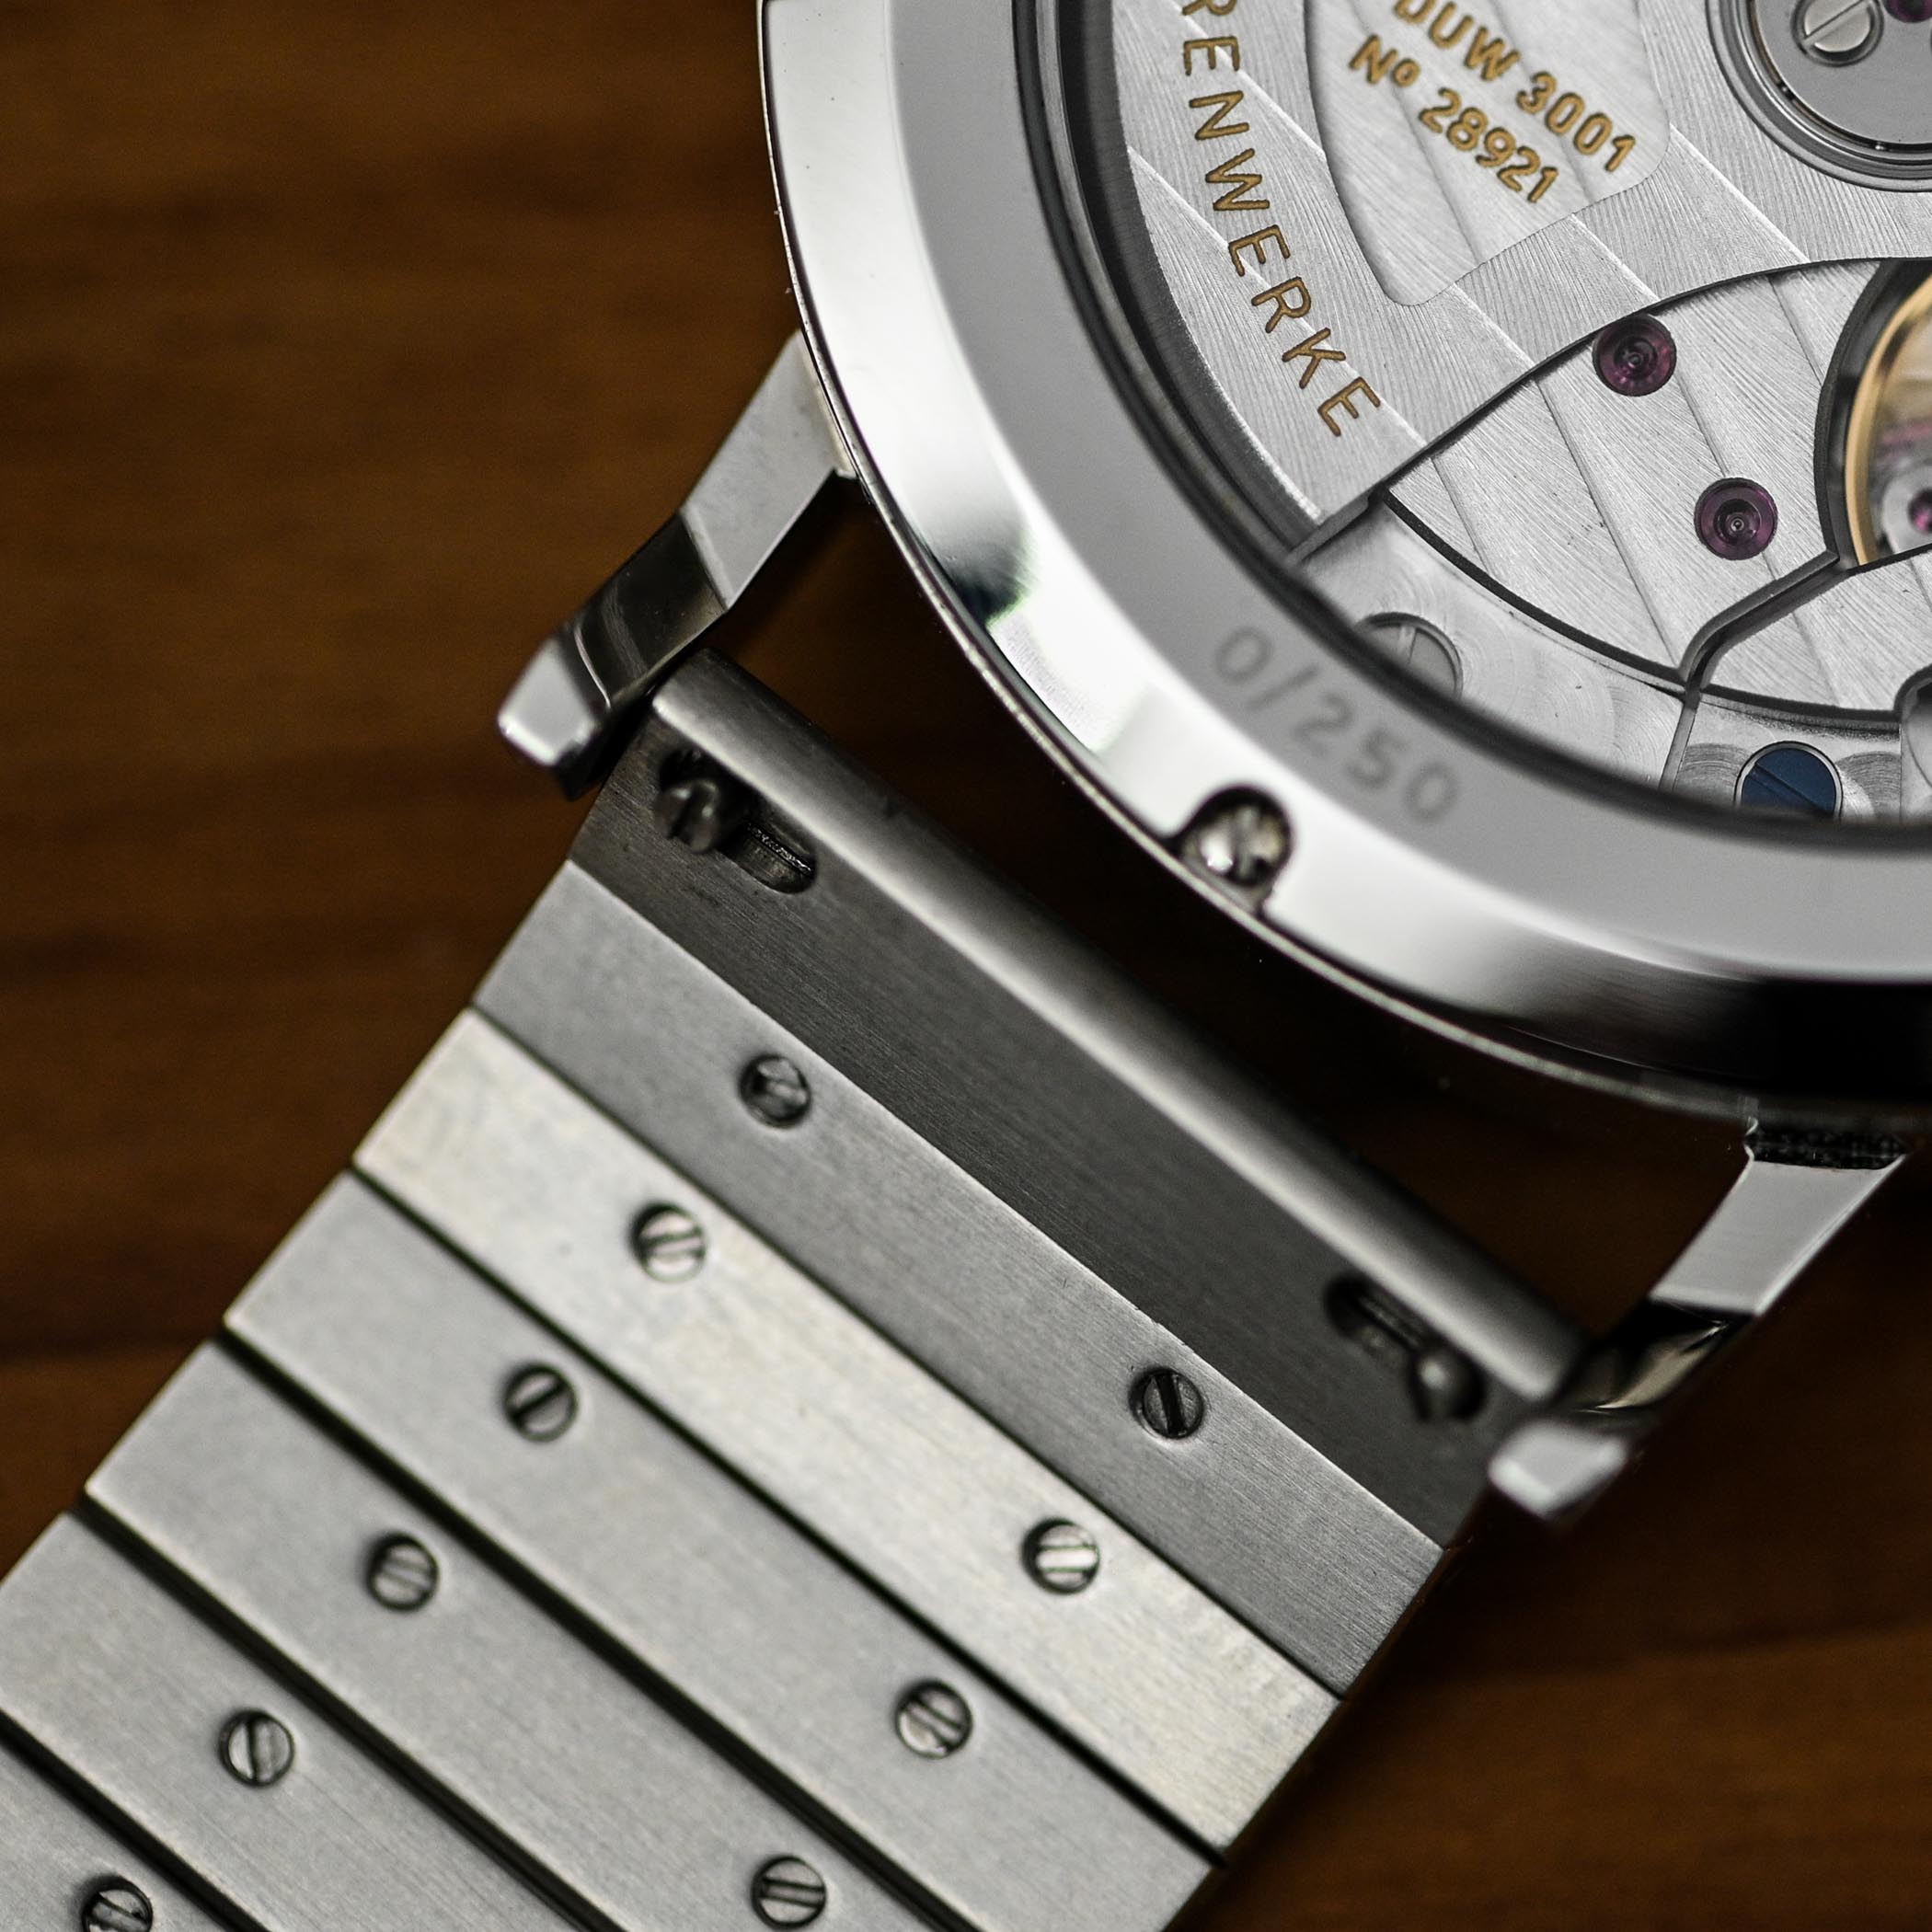 NOMOS Ahoi Neomatik Doctors Without Borders Limited Edition - review - 7